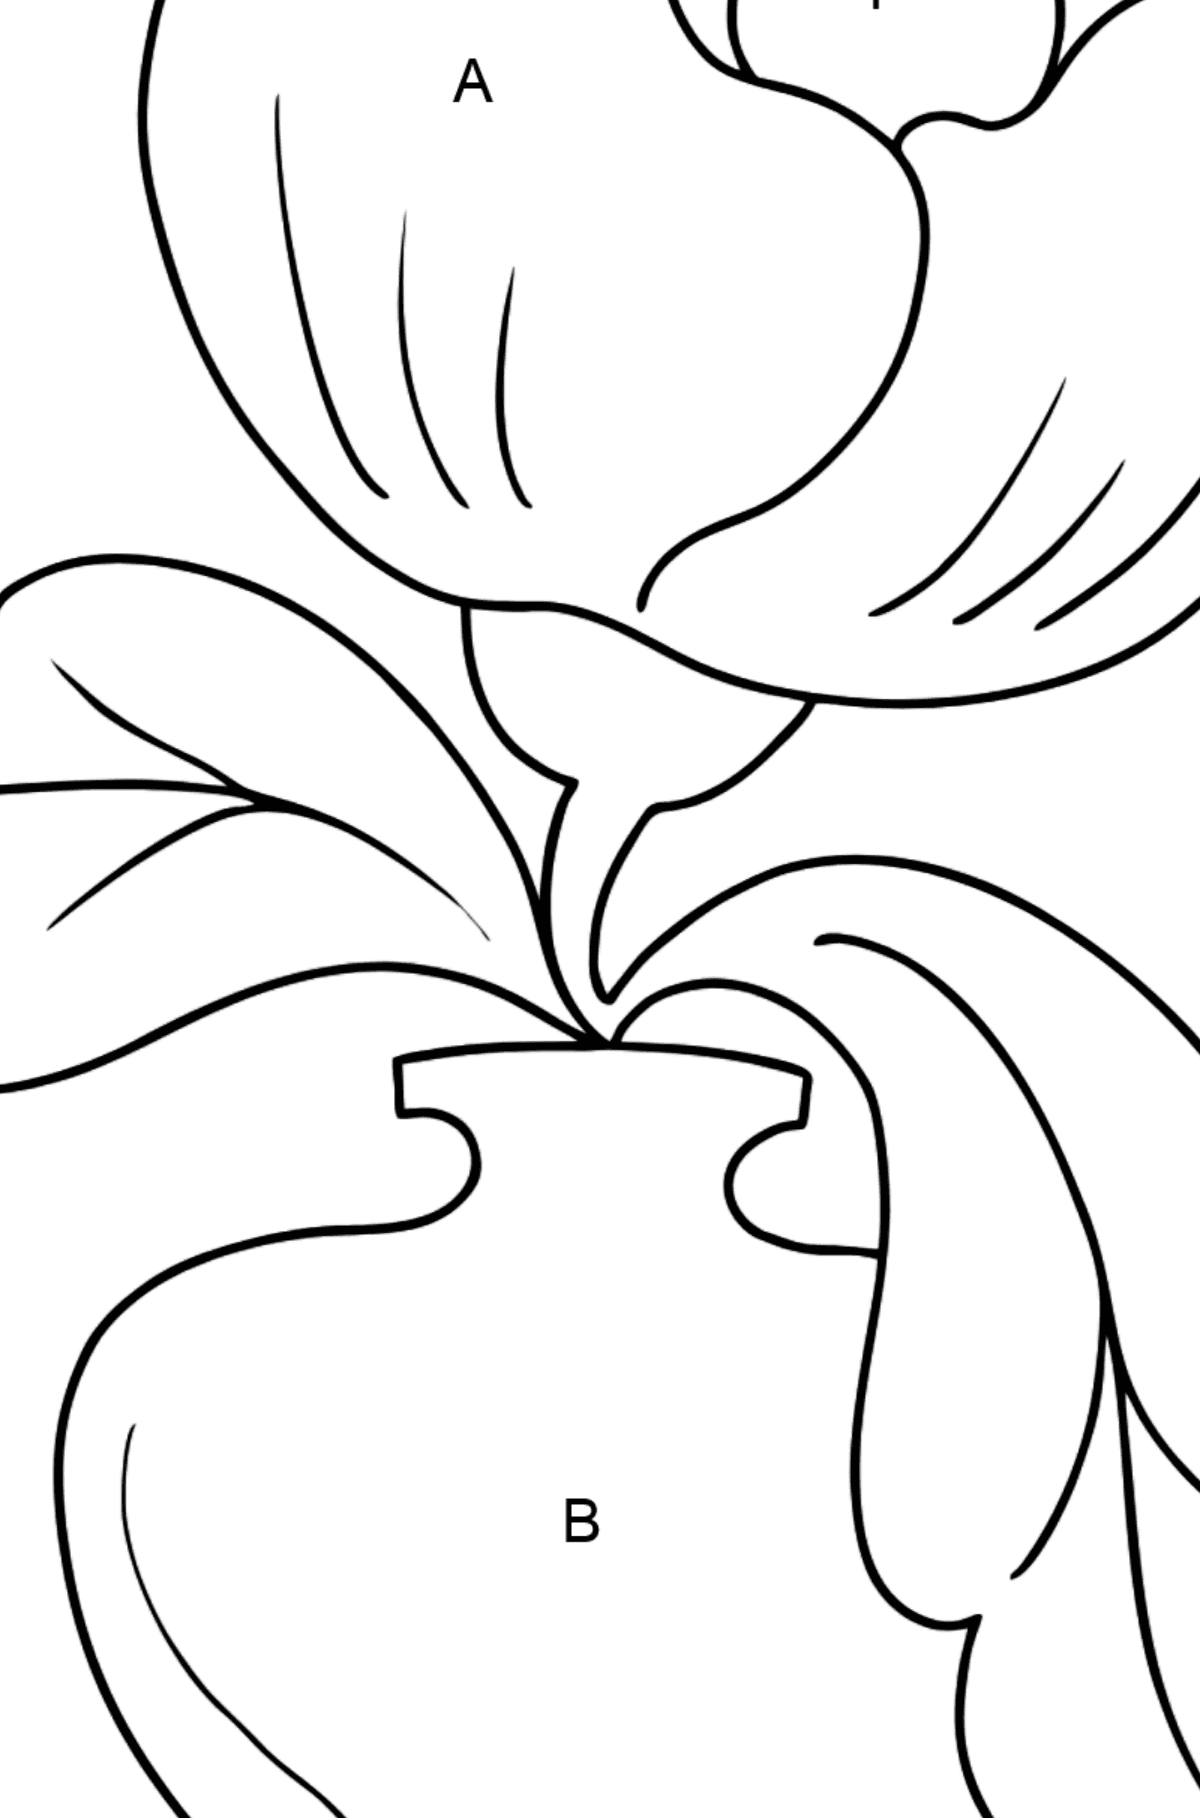 Coloring Page - flowers in a vase - Coloring by Letters for Kids